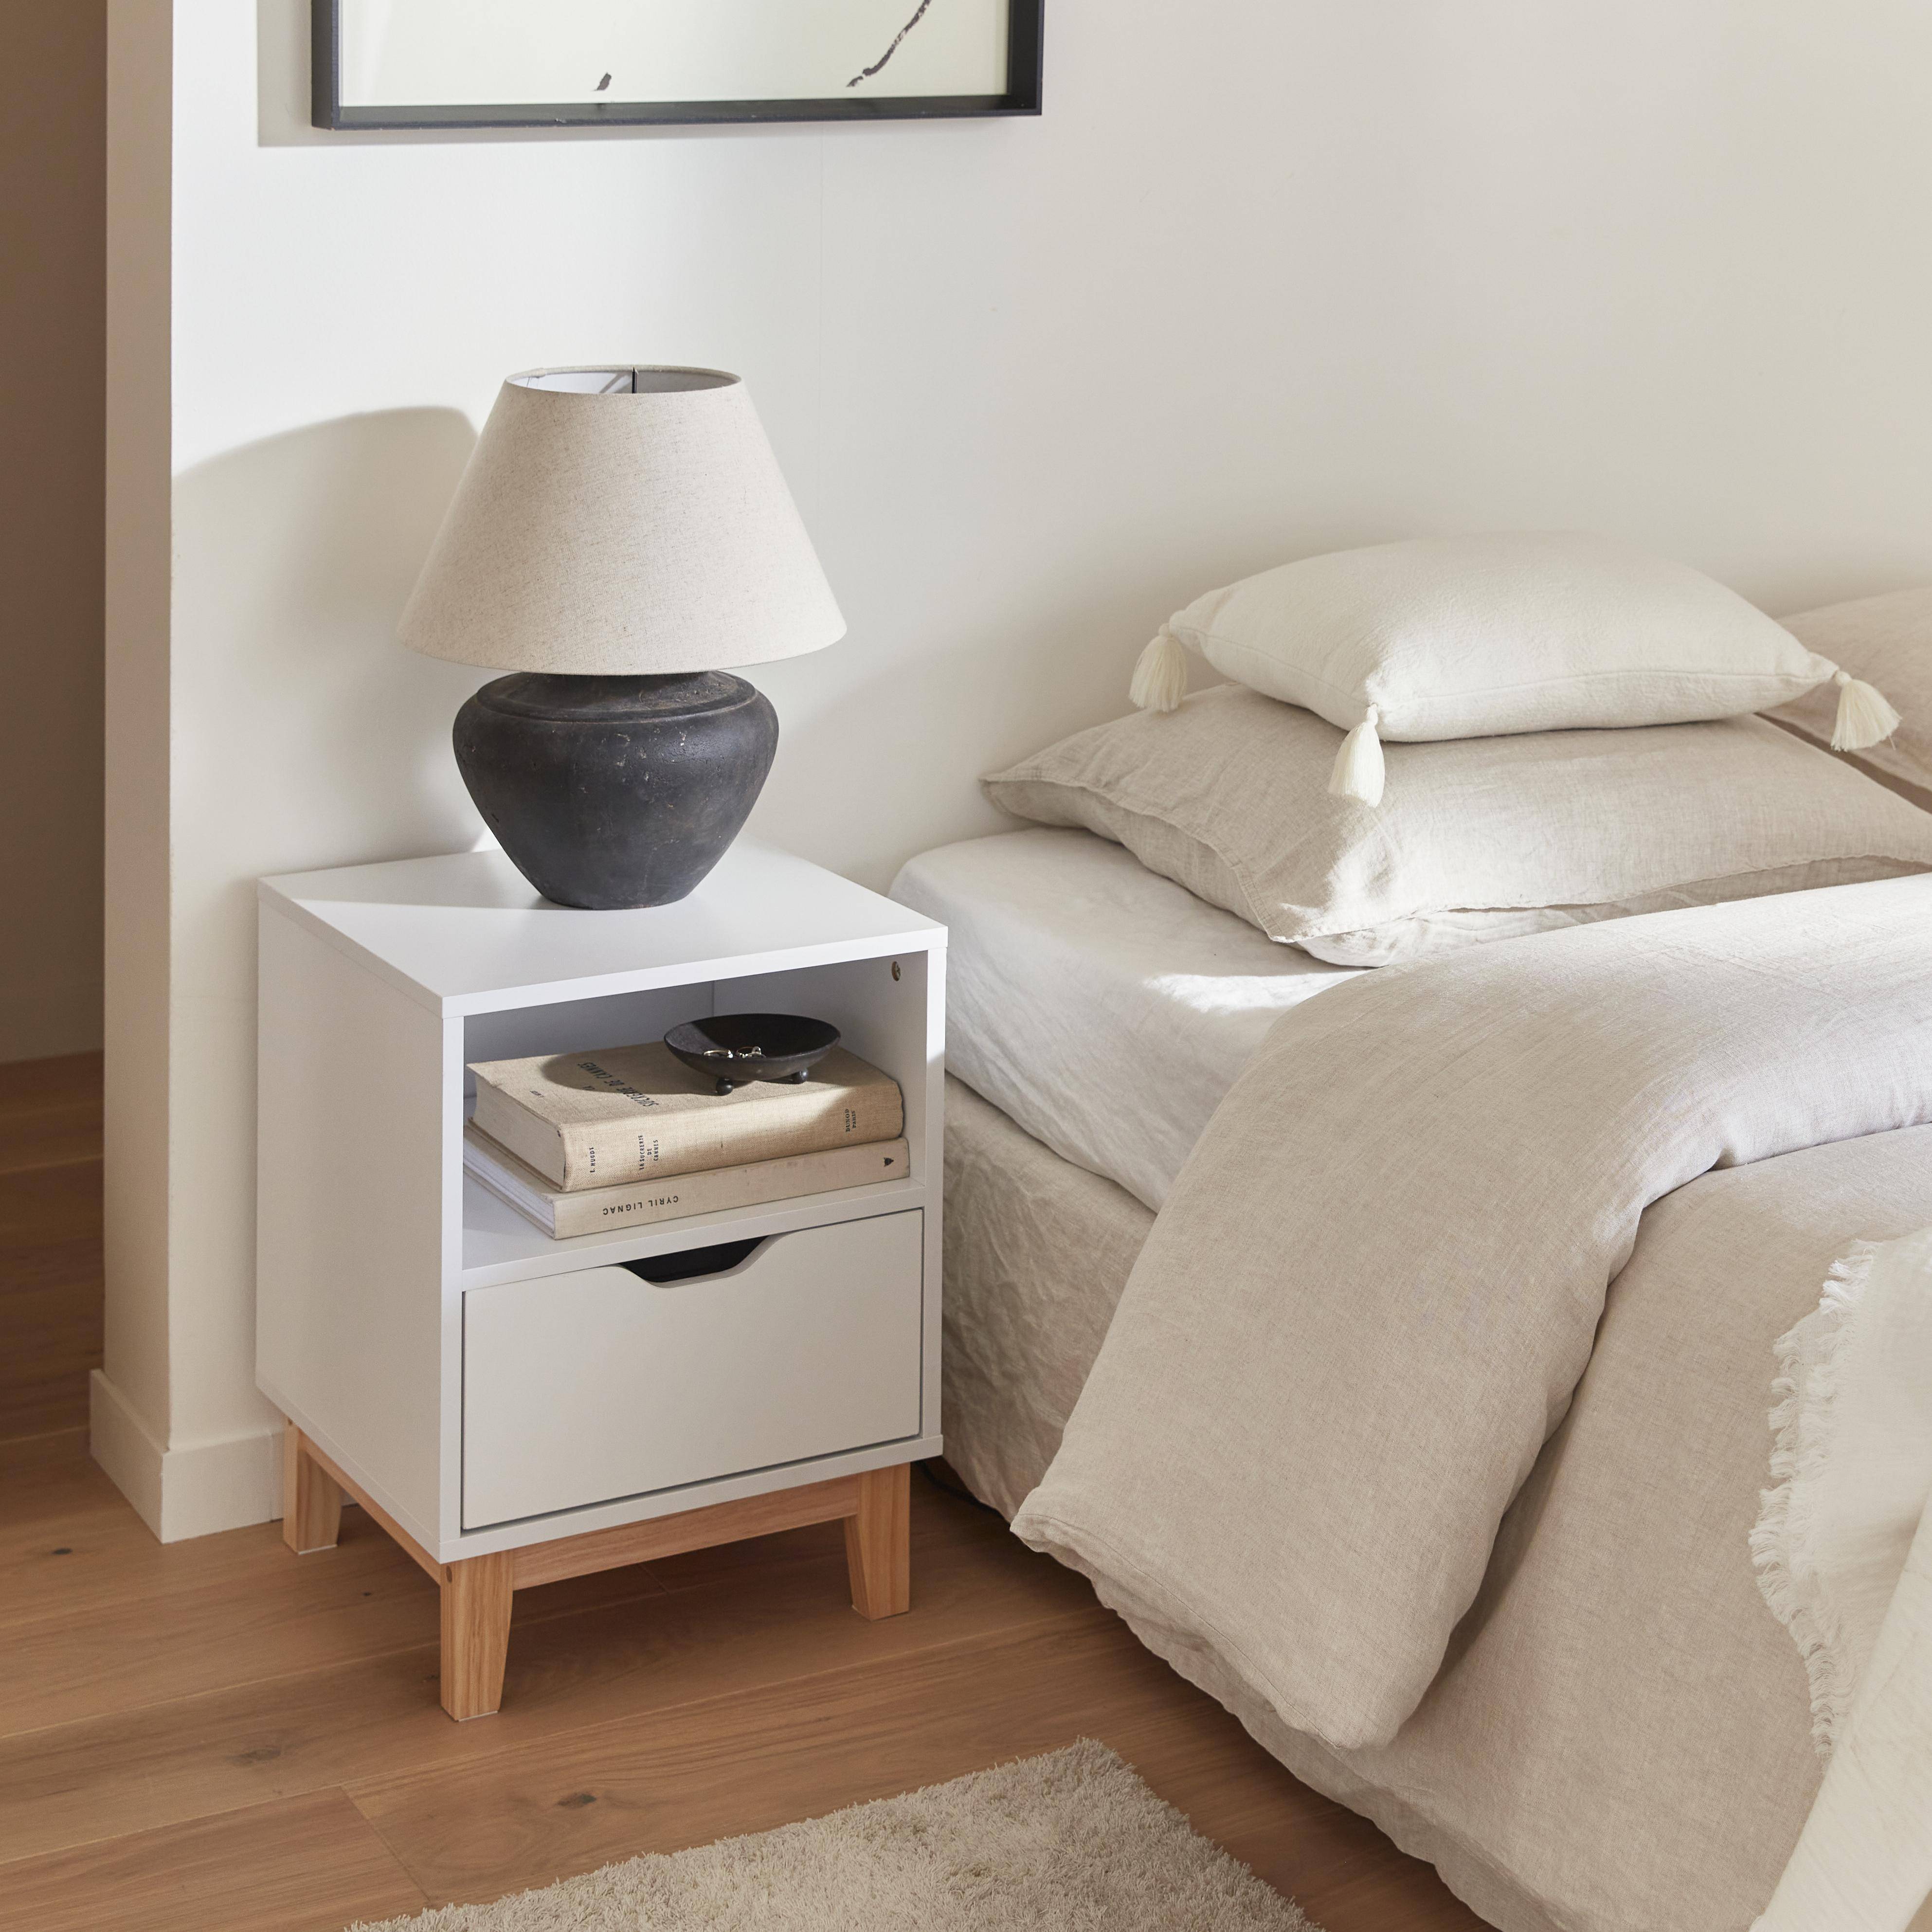 White bedside table with fir wood legs - Floki - 40 x 39 x 52cm - 1 drawer and 1 niche Photo1